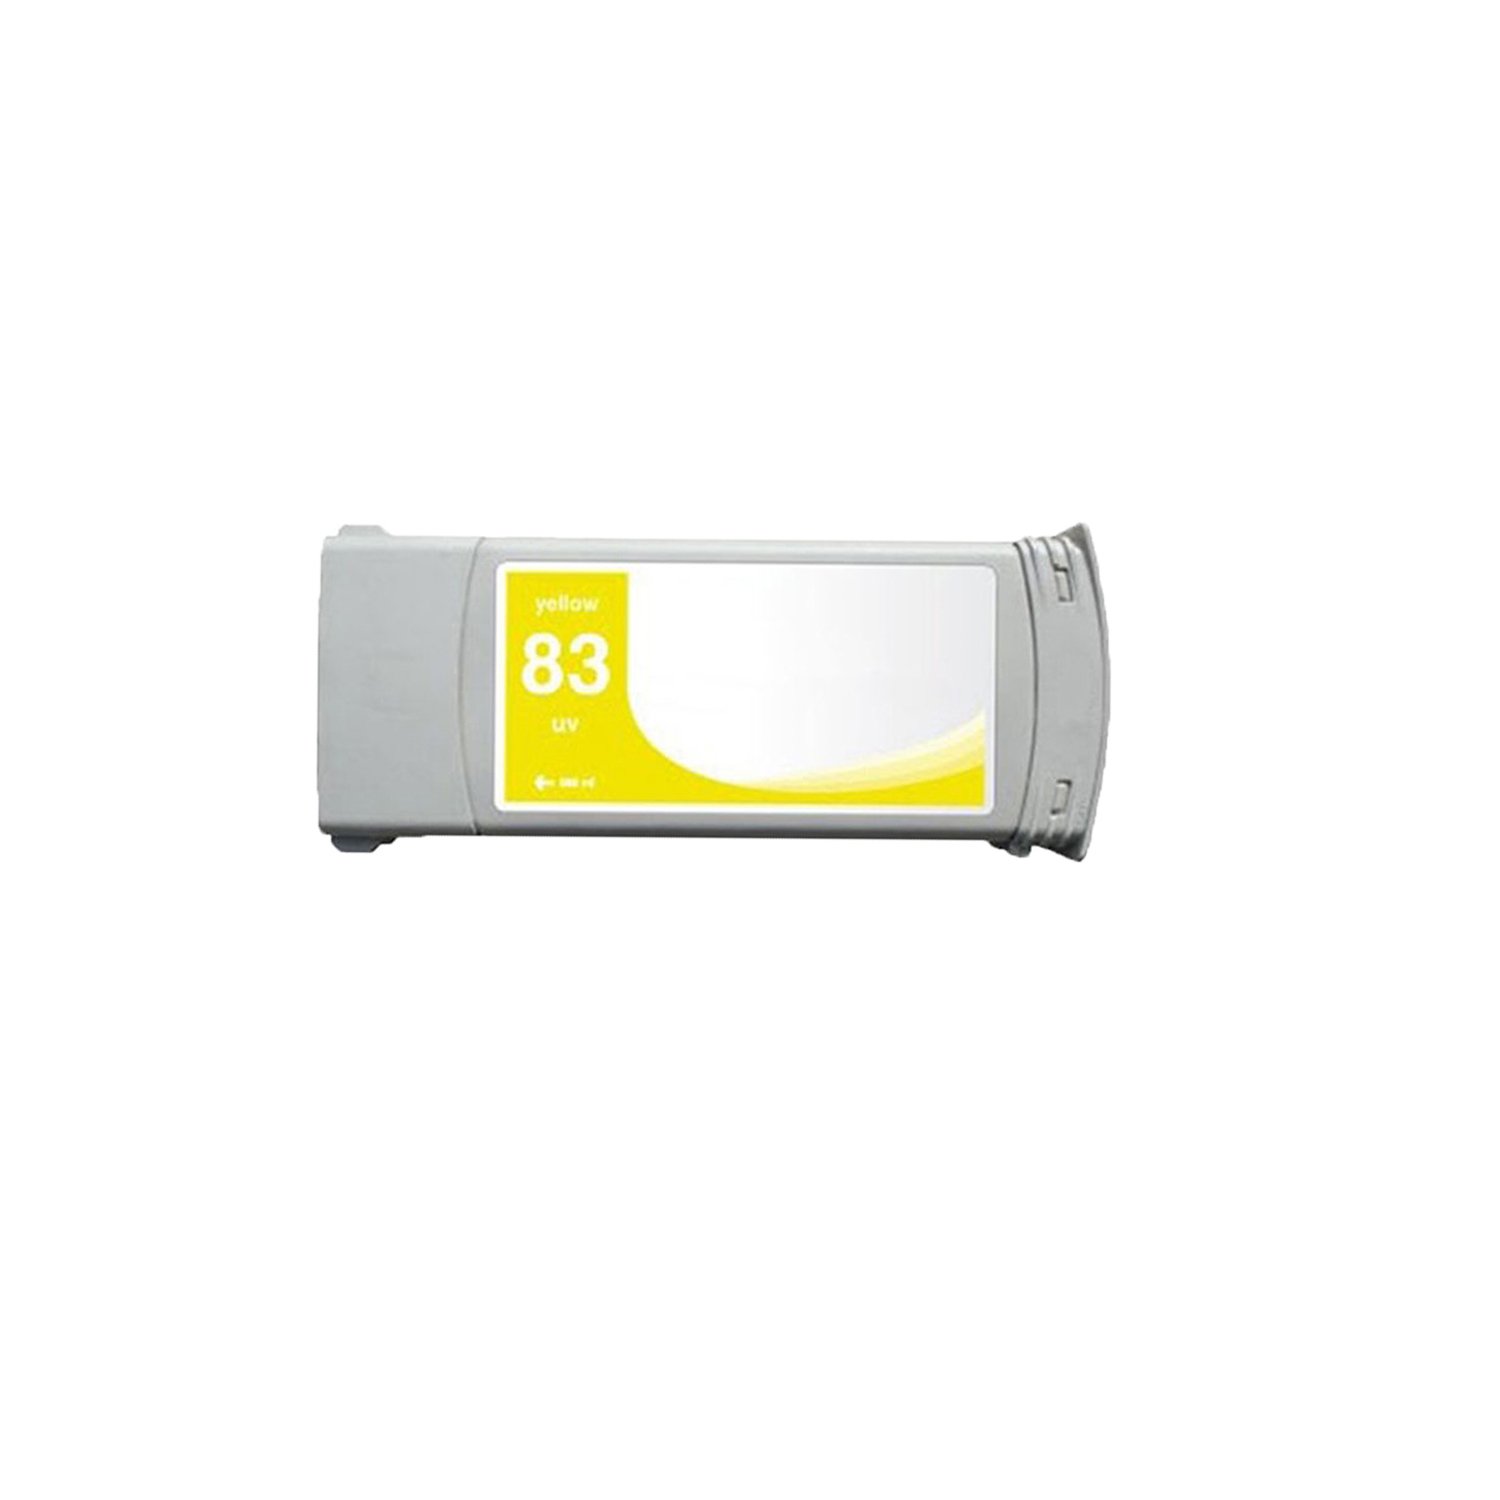 Compatible C4943A No. 83 - Yellow for Hp Plotter 5000 / 5500 series (UV)